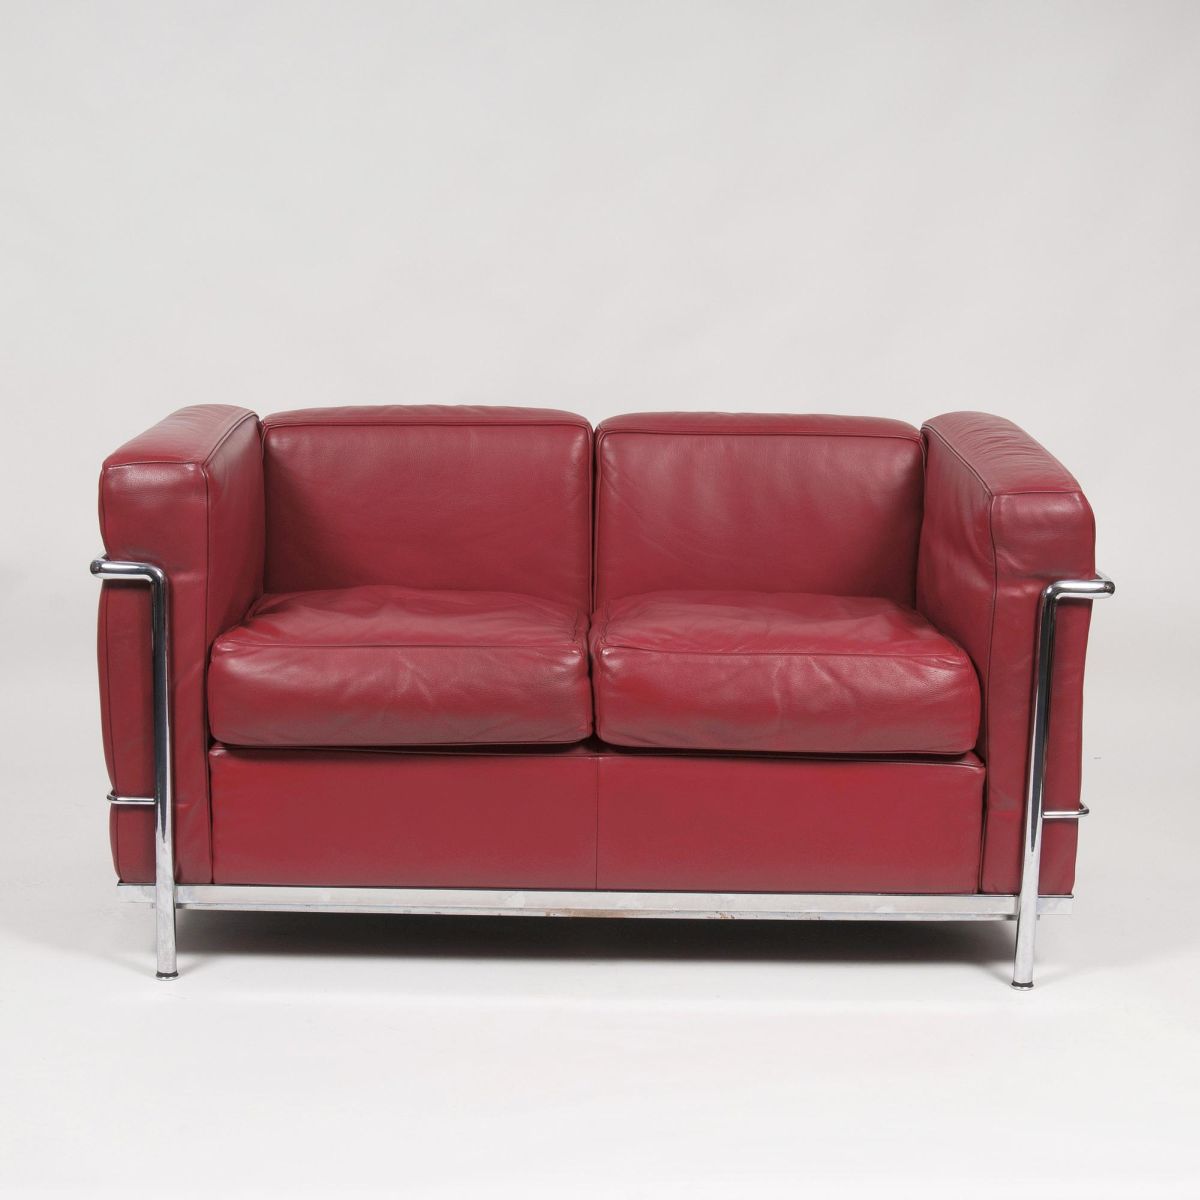 A Two-Seater Sofa 'LC2' for Cassina